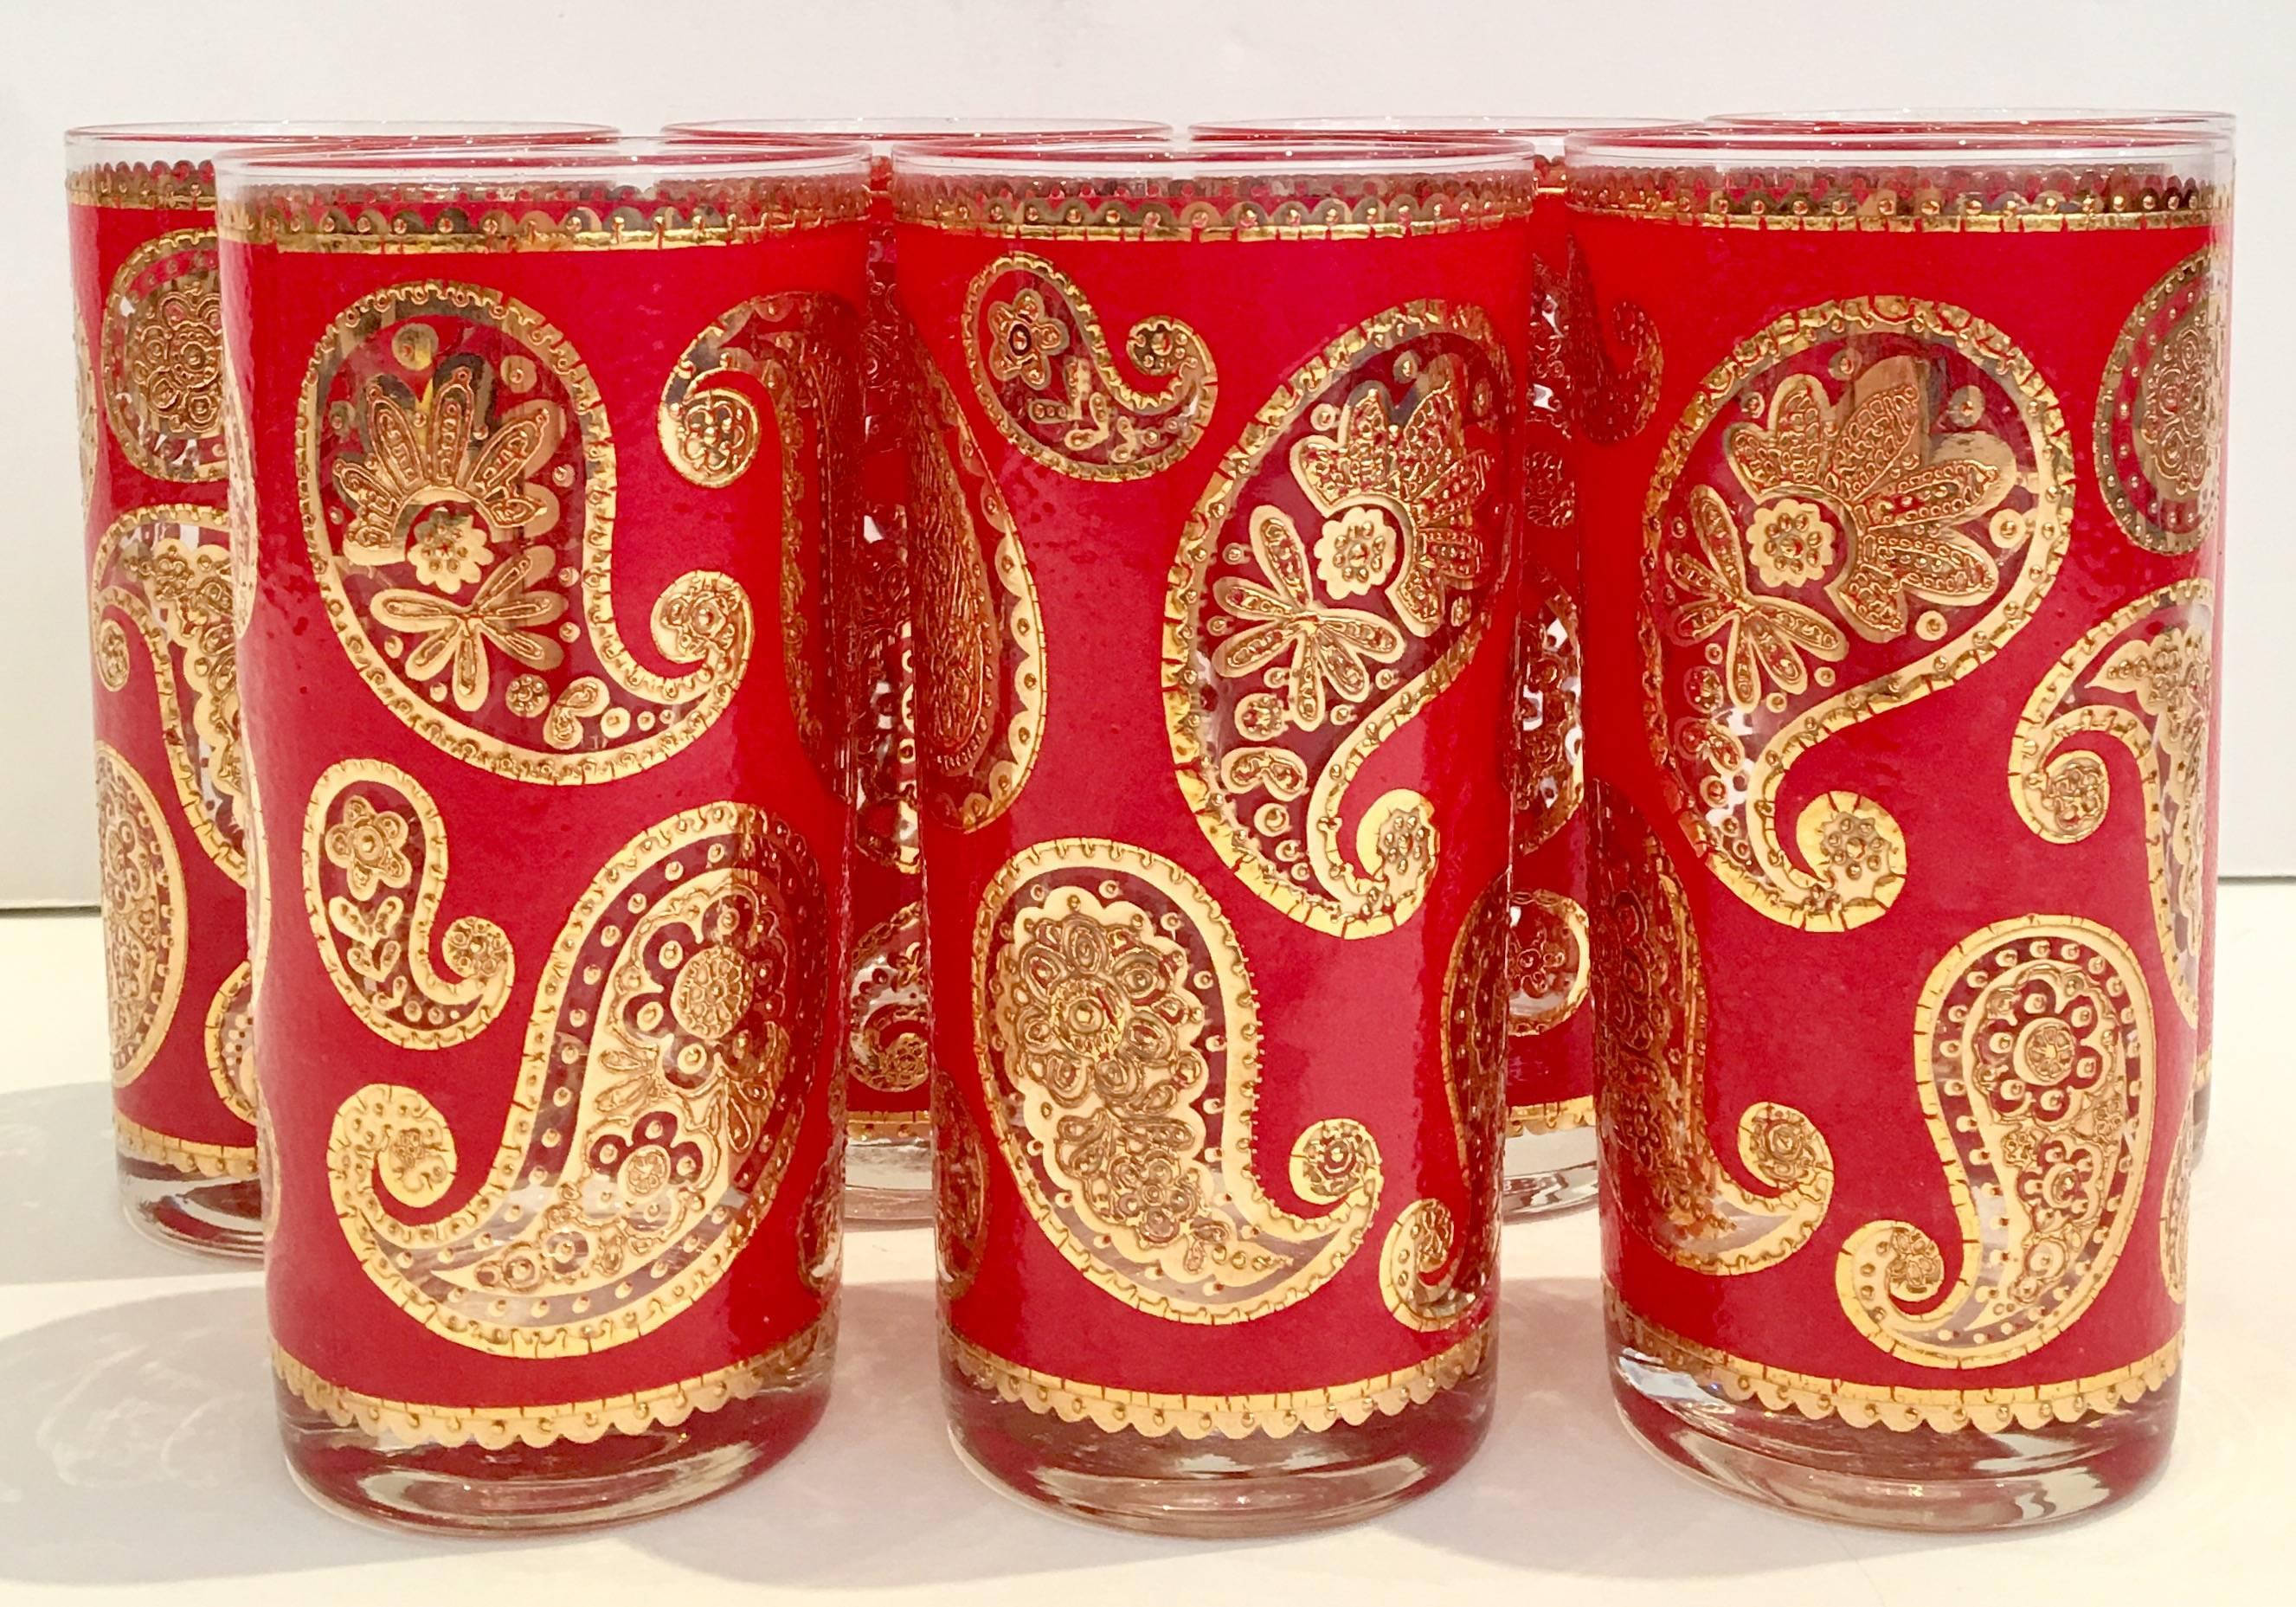 Hollywood Regency bright red and 22-karat gold paisley pattern high ball glasses by Culver.